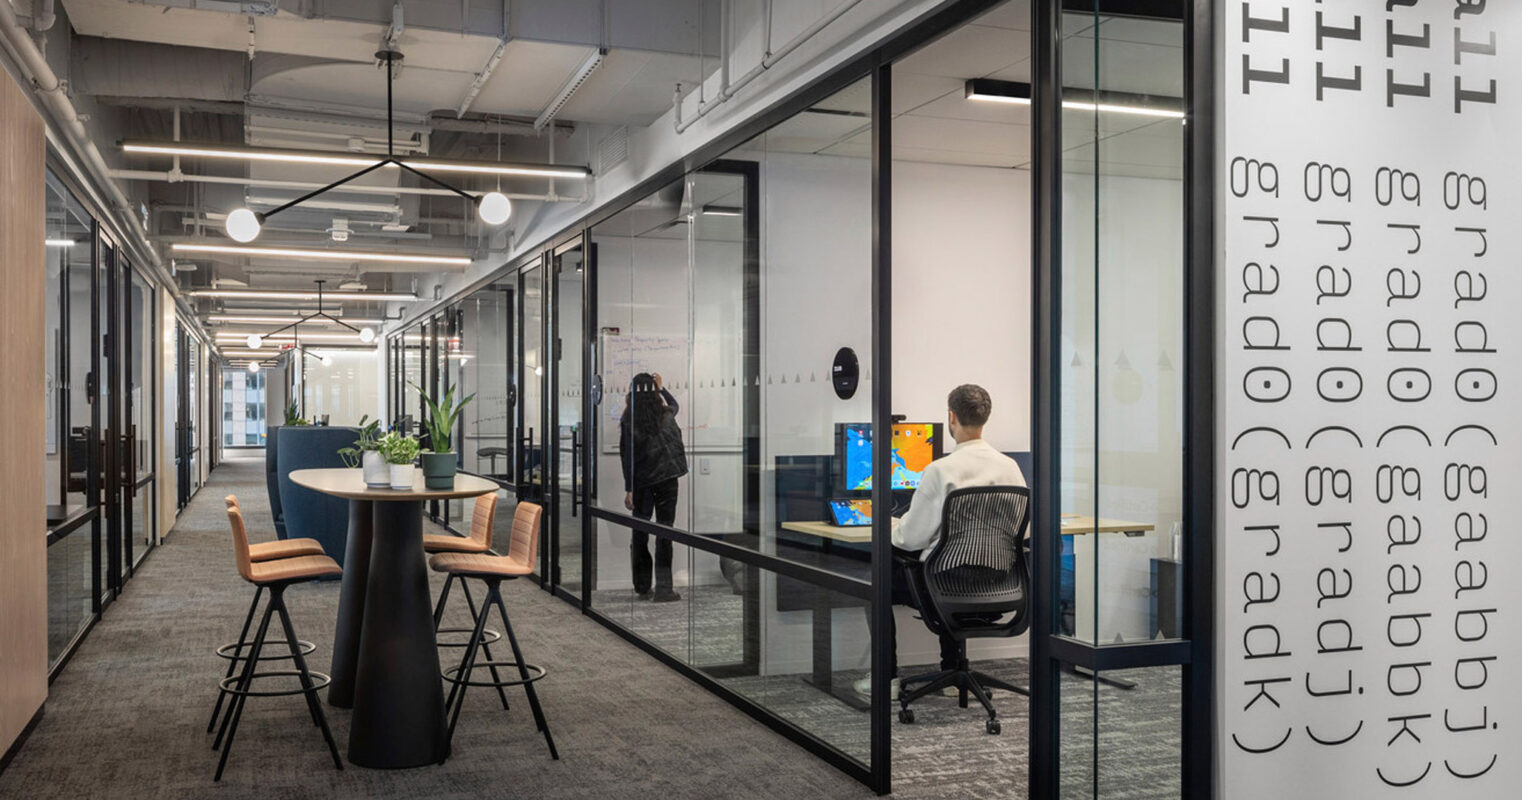 Modern office interior featuring exposed ceiling pipes, linear pendant lighting, and glass-walled meeting rooms. Bar-height tables pair with stools for casual workspaces. Subtle branding appears on the glass with frosted lettering.